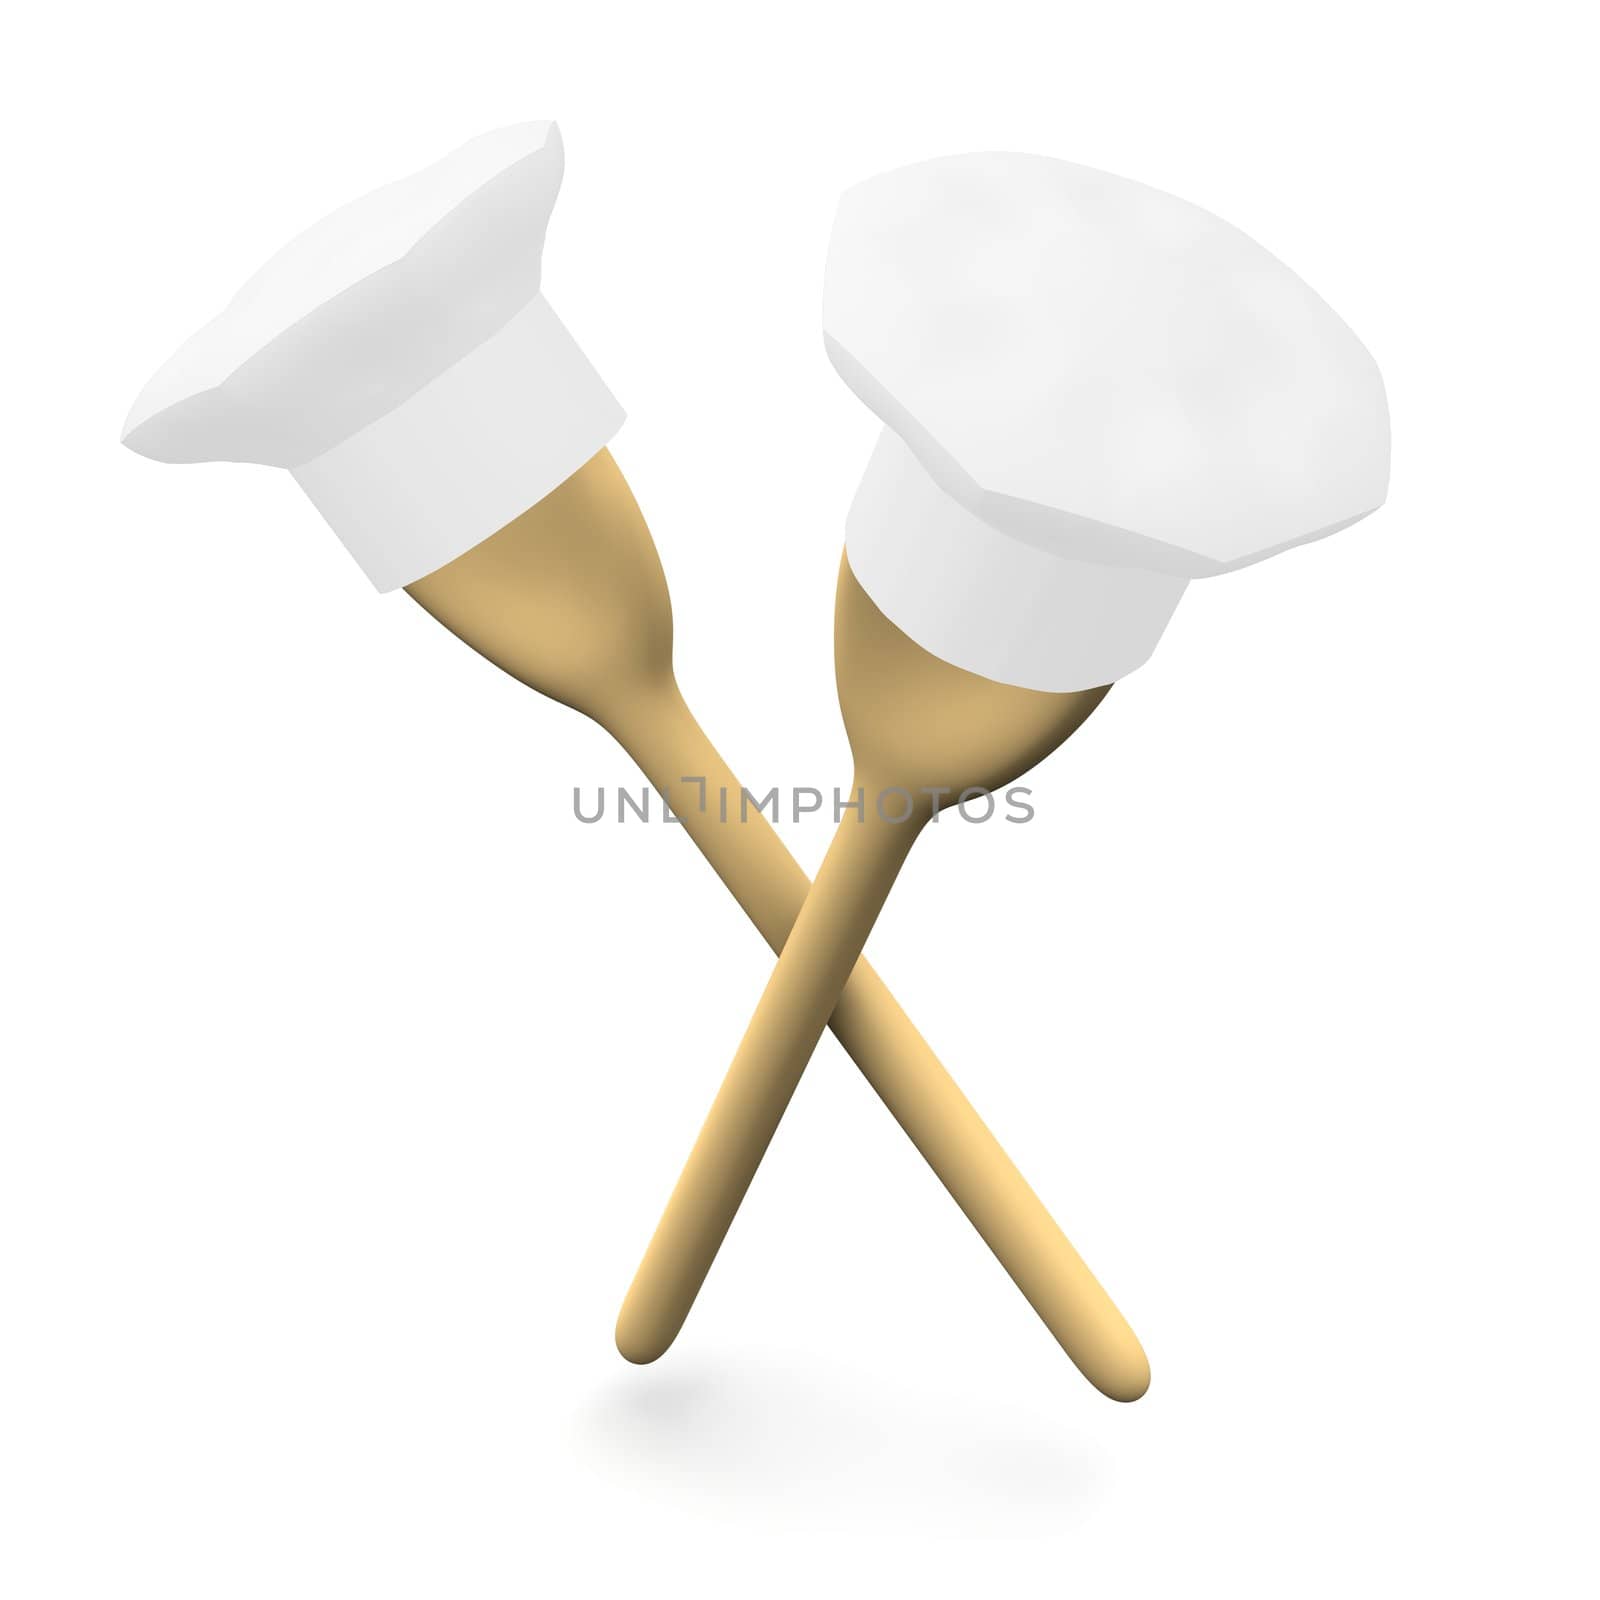 Two spoons with caps. 3d rendered illustration.